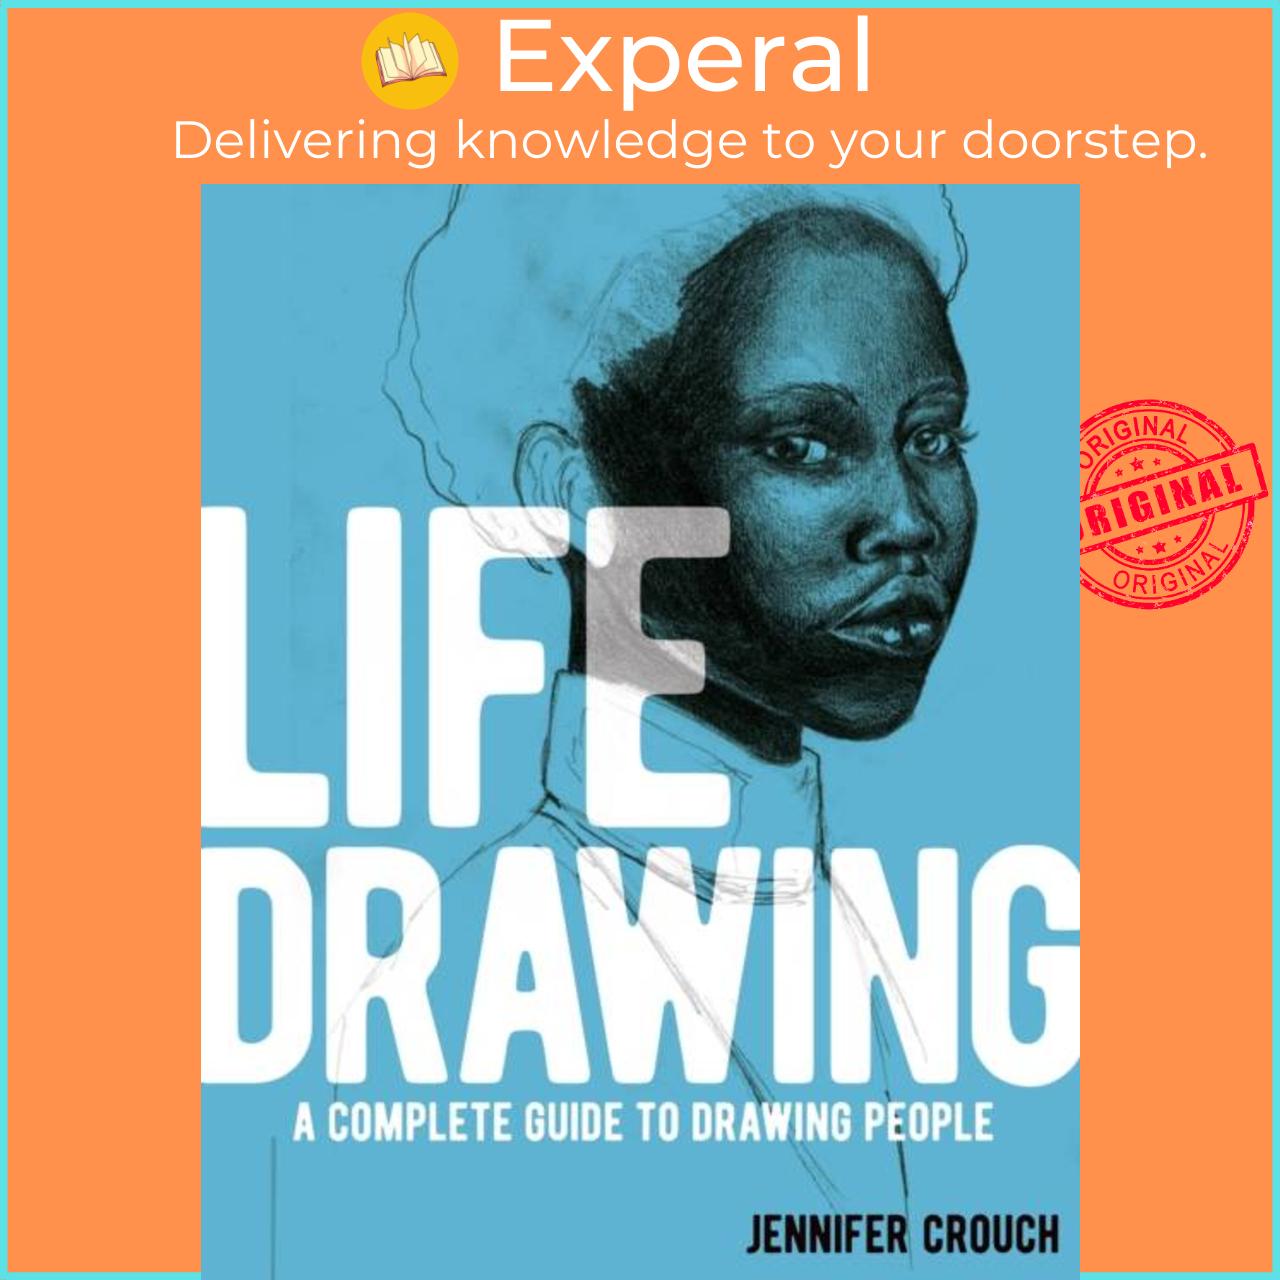 Sách - Life Drawing - A Complete Guide to Drawing People by Jennifer Crouch (UK edition, paperback)